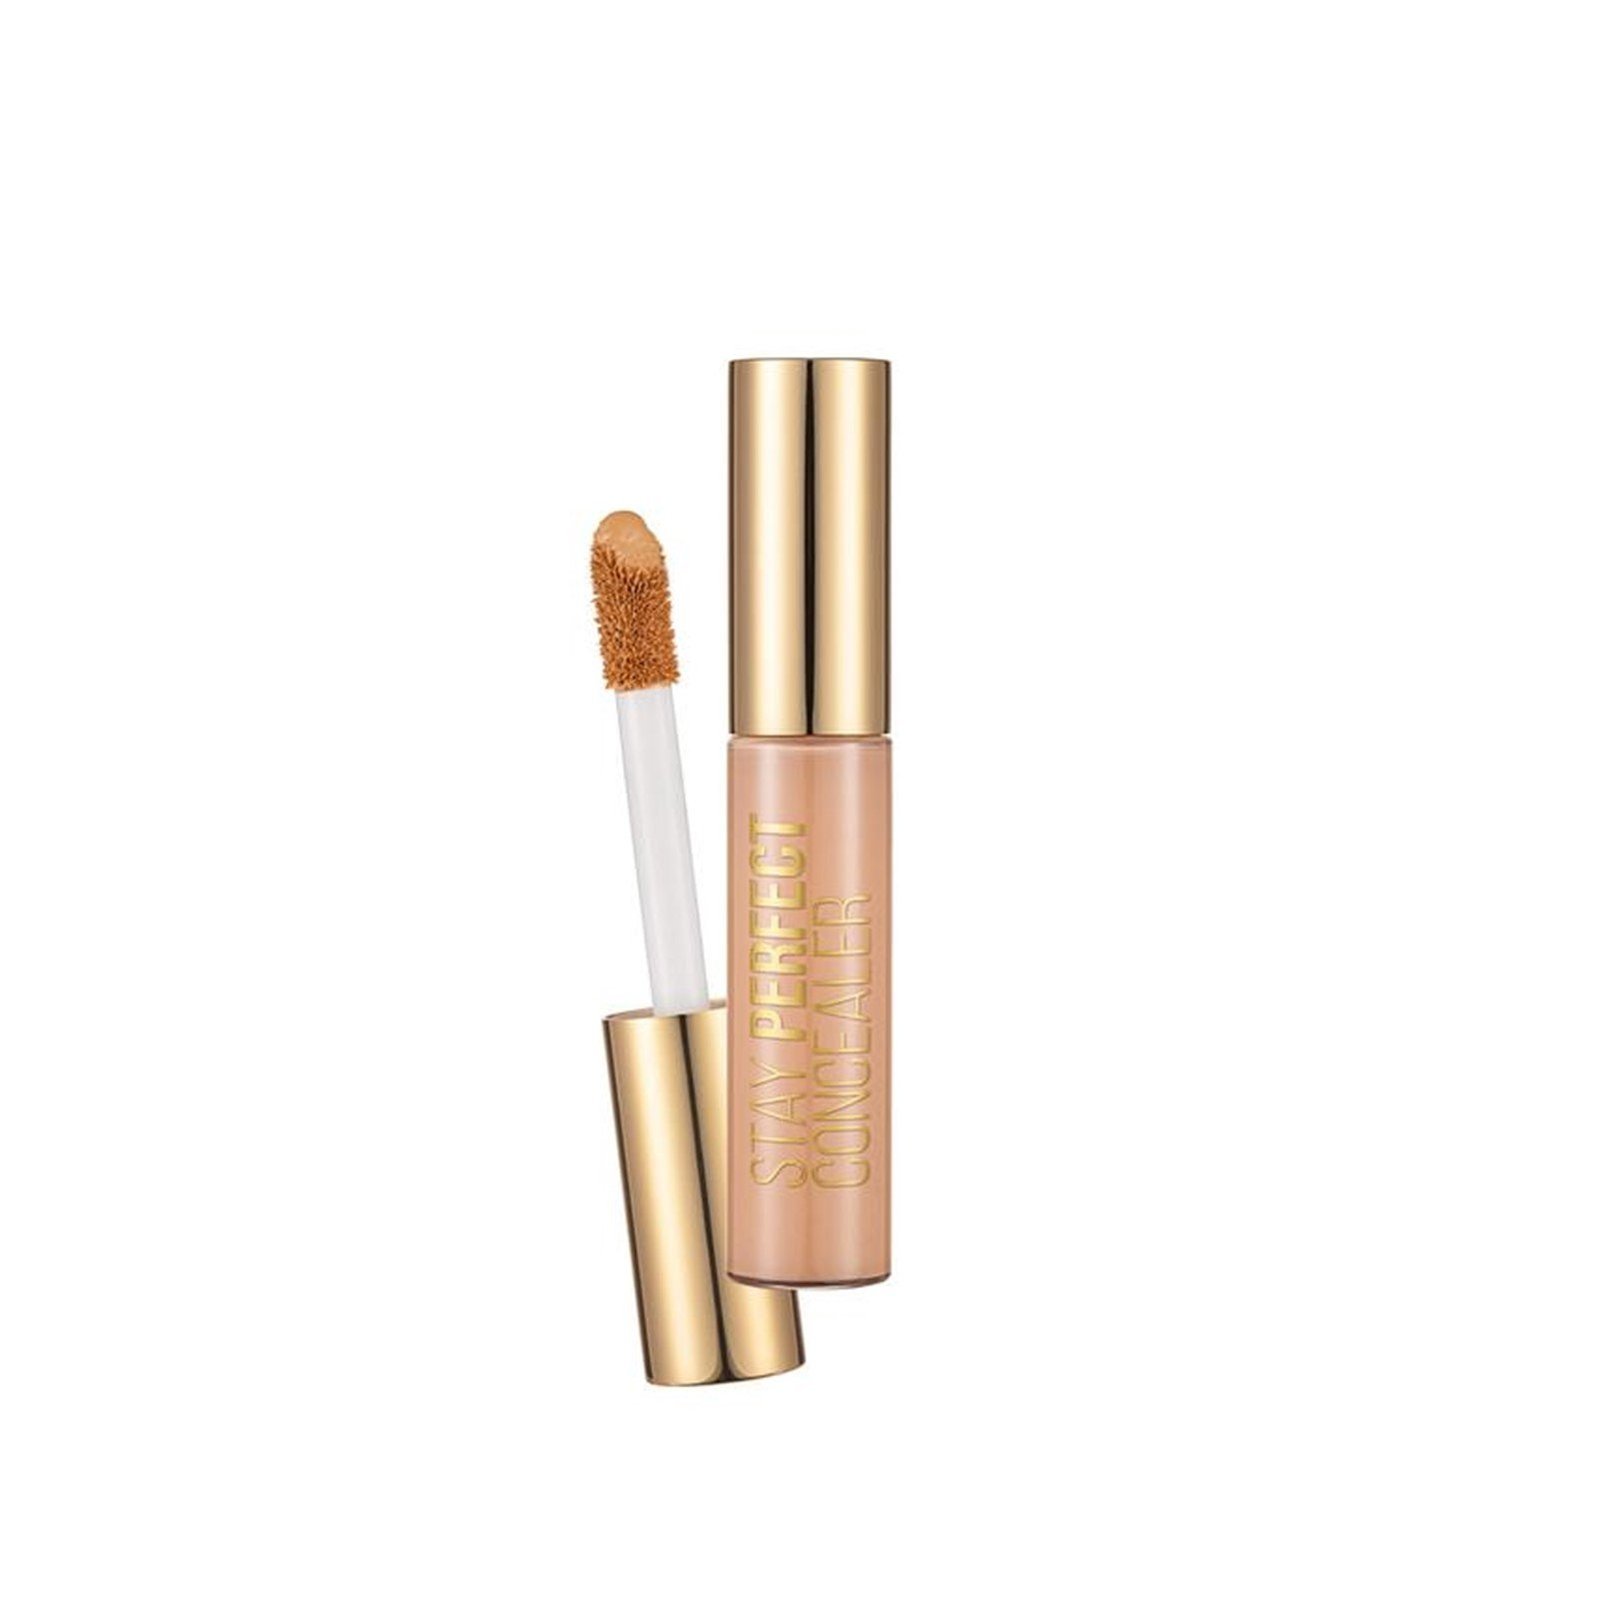 https://static.beautytocare.com/cdn-cgi/image/width=1600,height=1600,f=auto/media/catalog/product//f/l/flormar-stay-perfect-concealer-005-beige-12-5ml.jpg